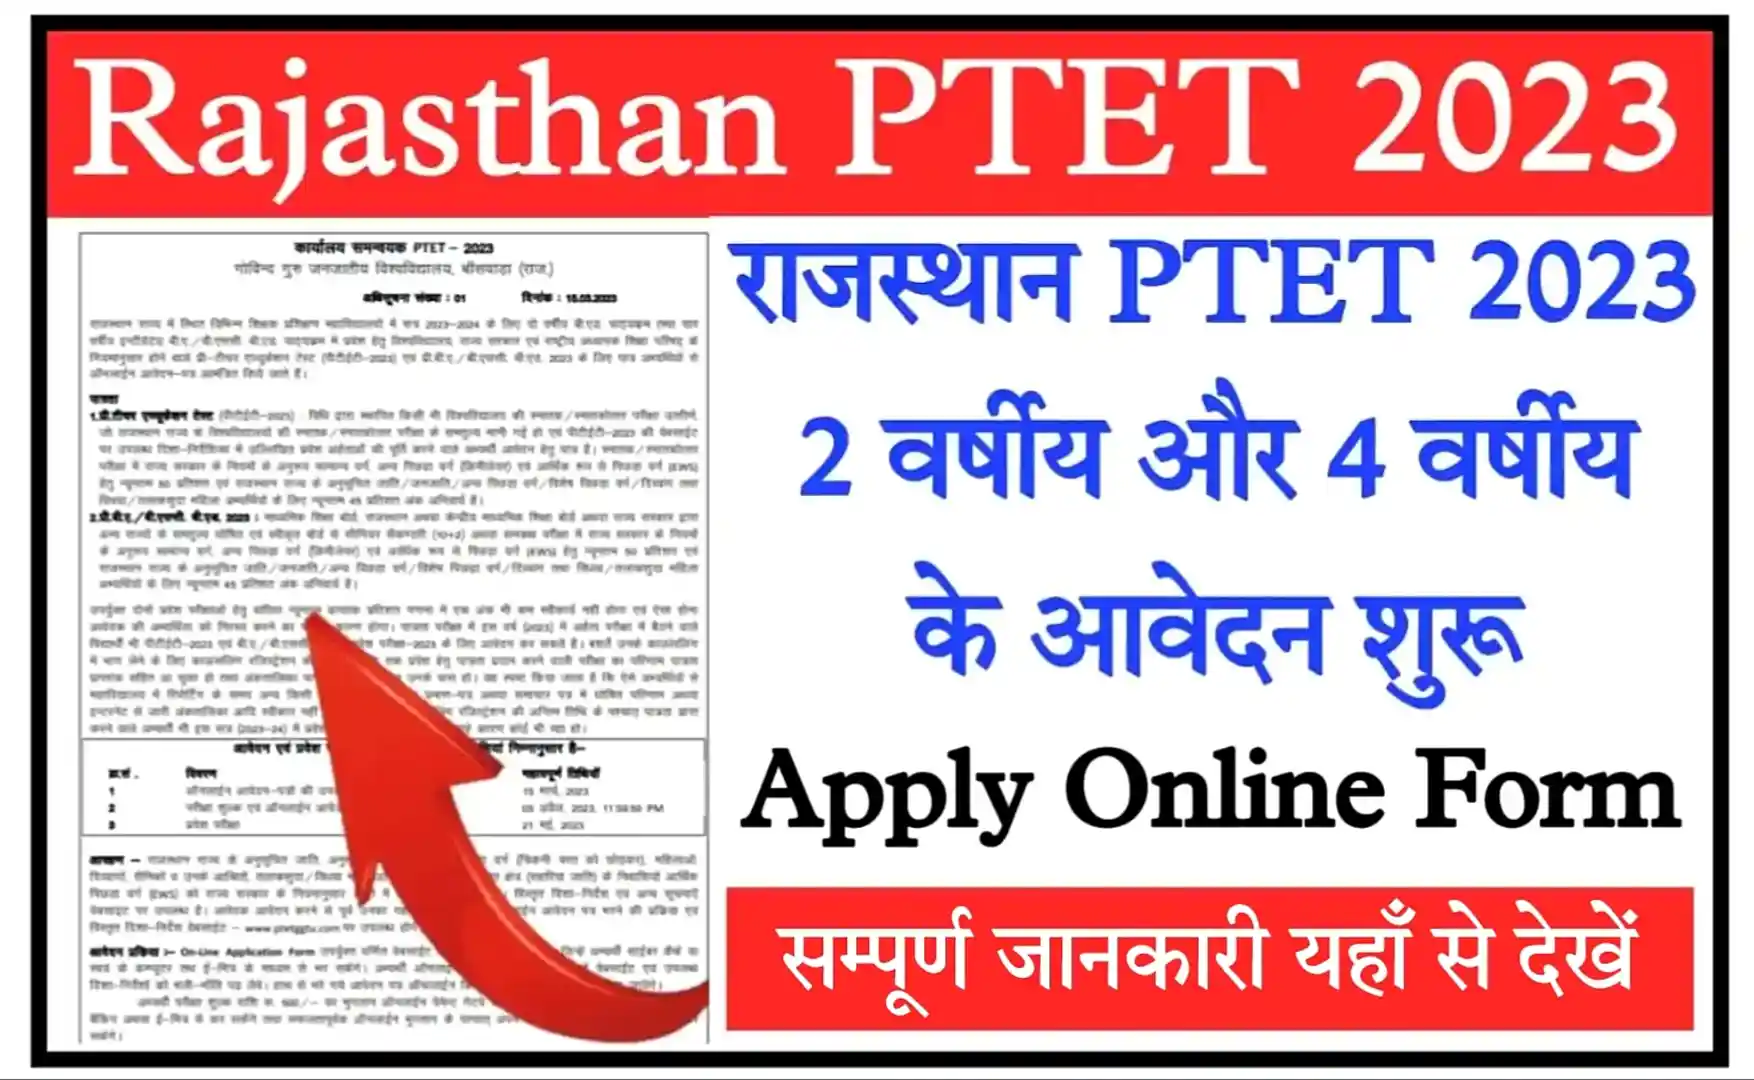 Rajasthan PTET 2023 Notification, Apply Online, Exam Date, Syllabus Check All Details